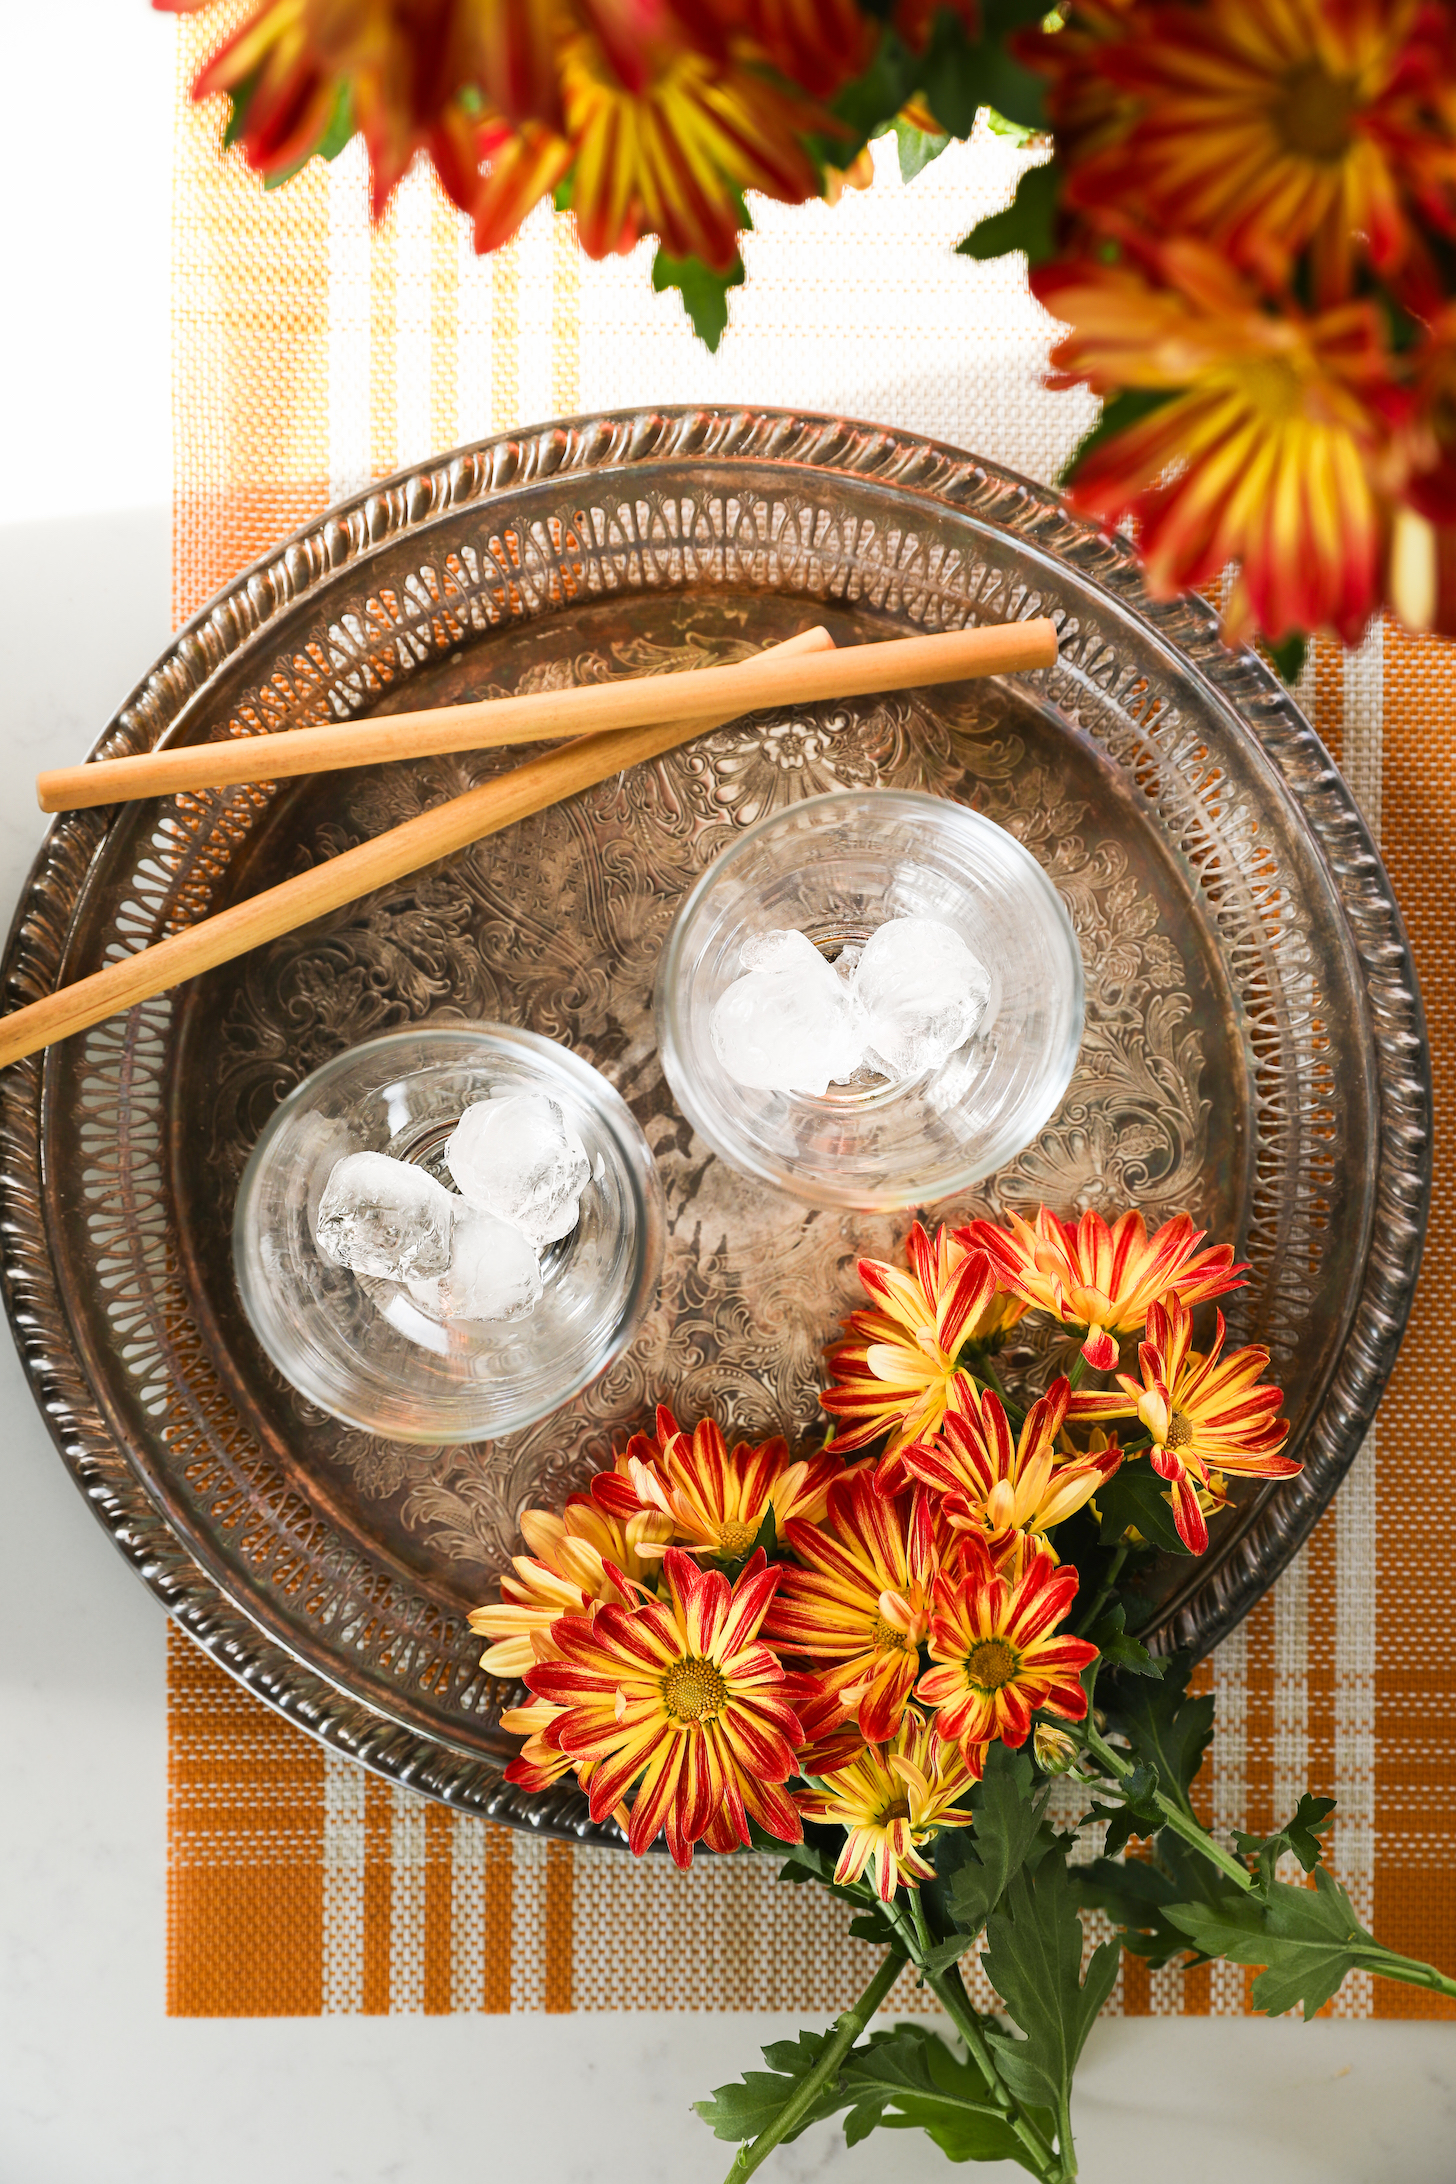 A bird's-eye view of two glasses with ice on a brass tray, accompanied by two straws and nearby flowers.